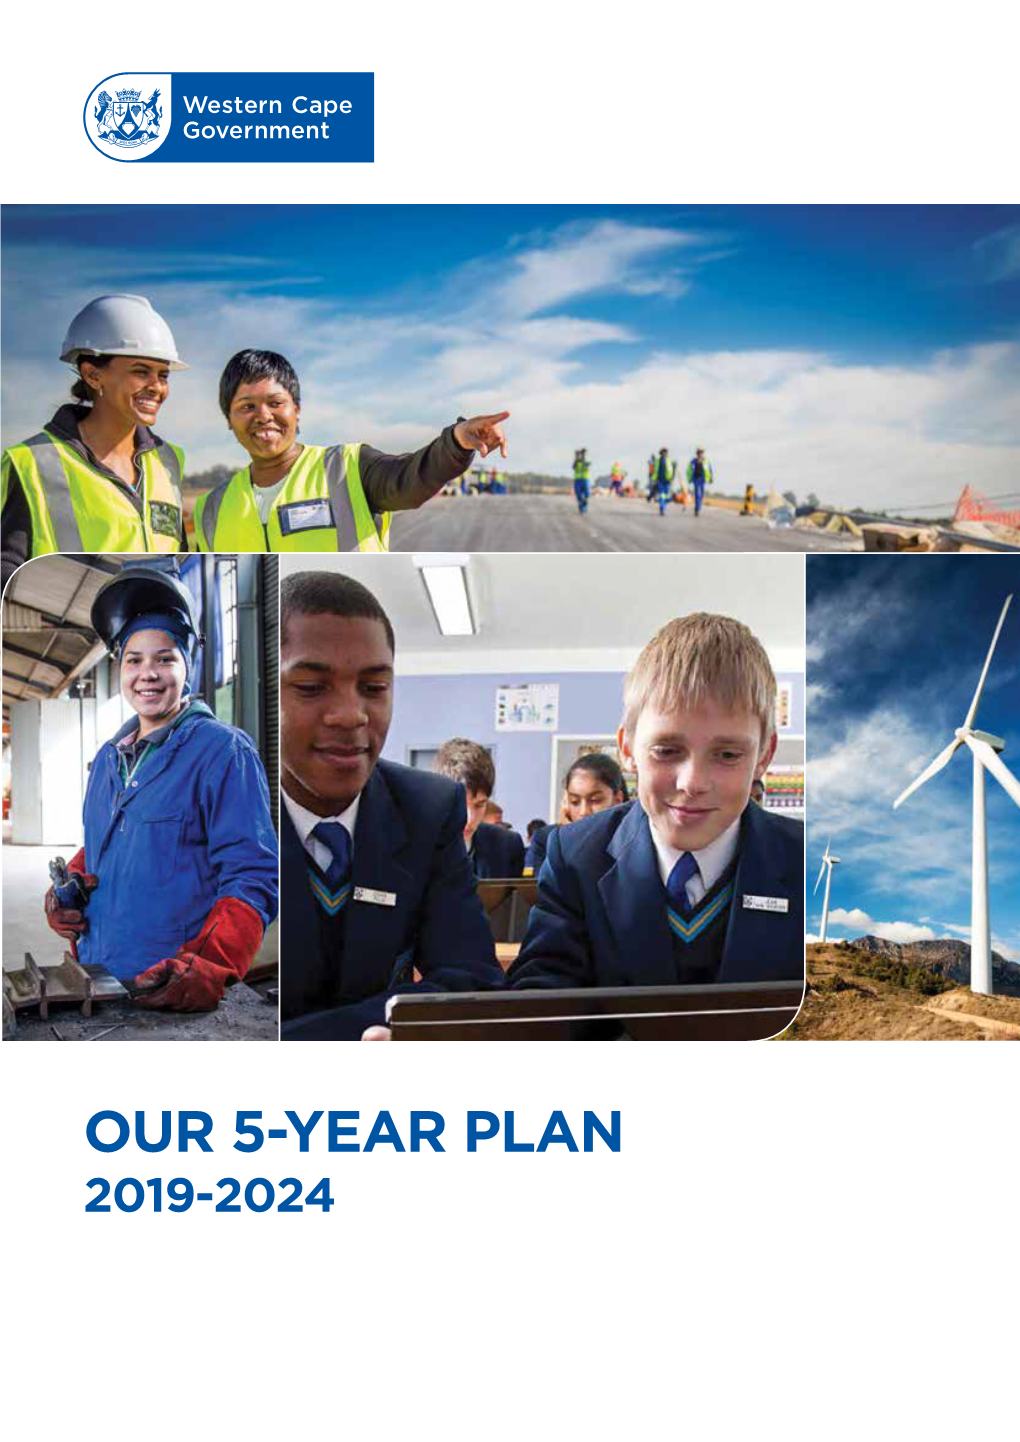 Our 5-Year Plan 2019-2024 Contents